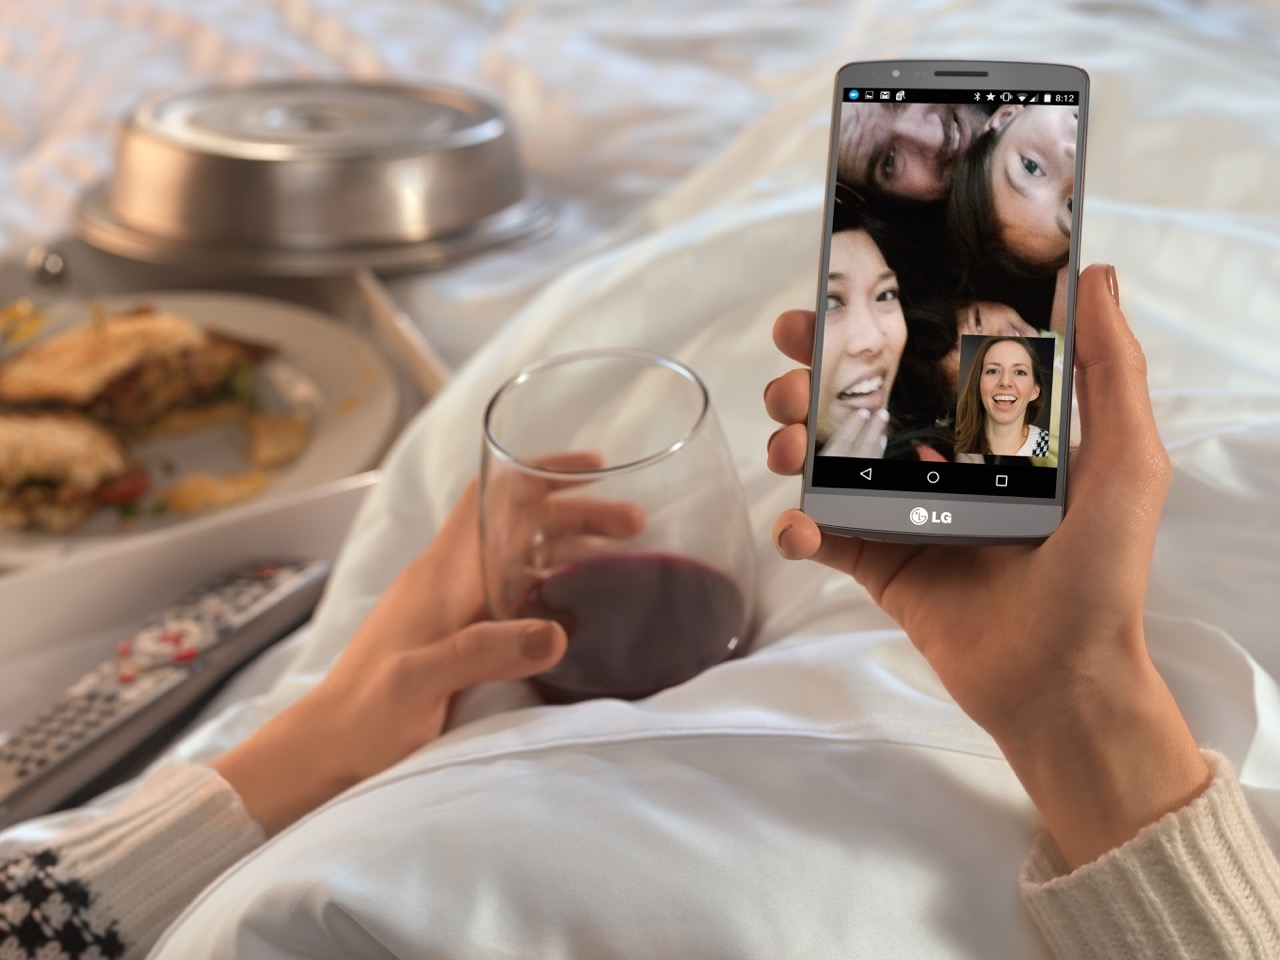 Cellphone and food in bed. 